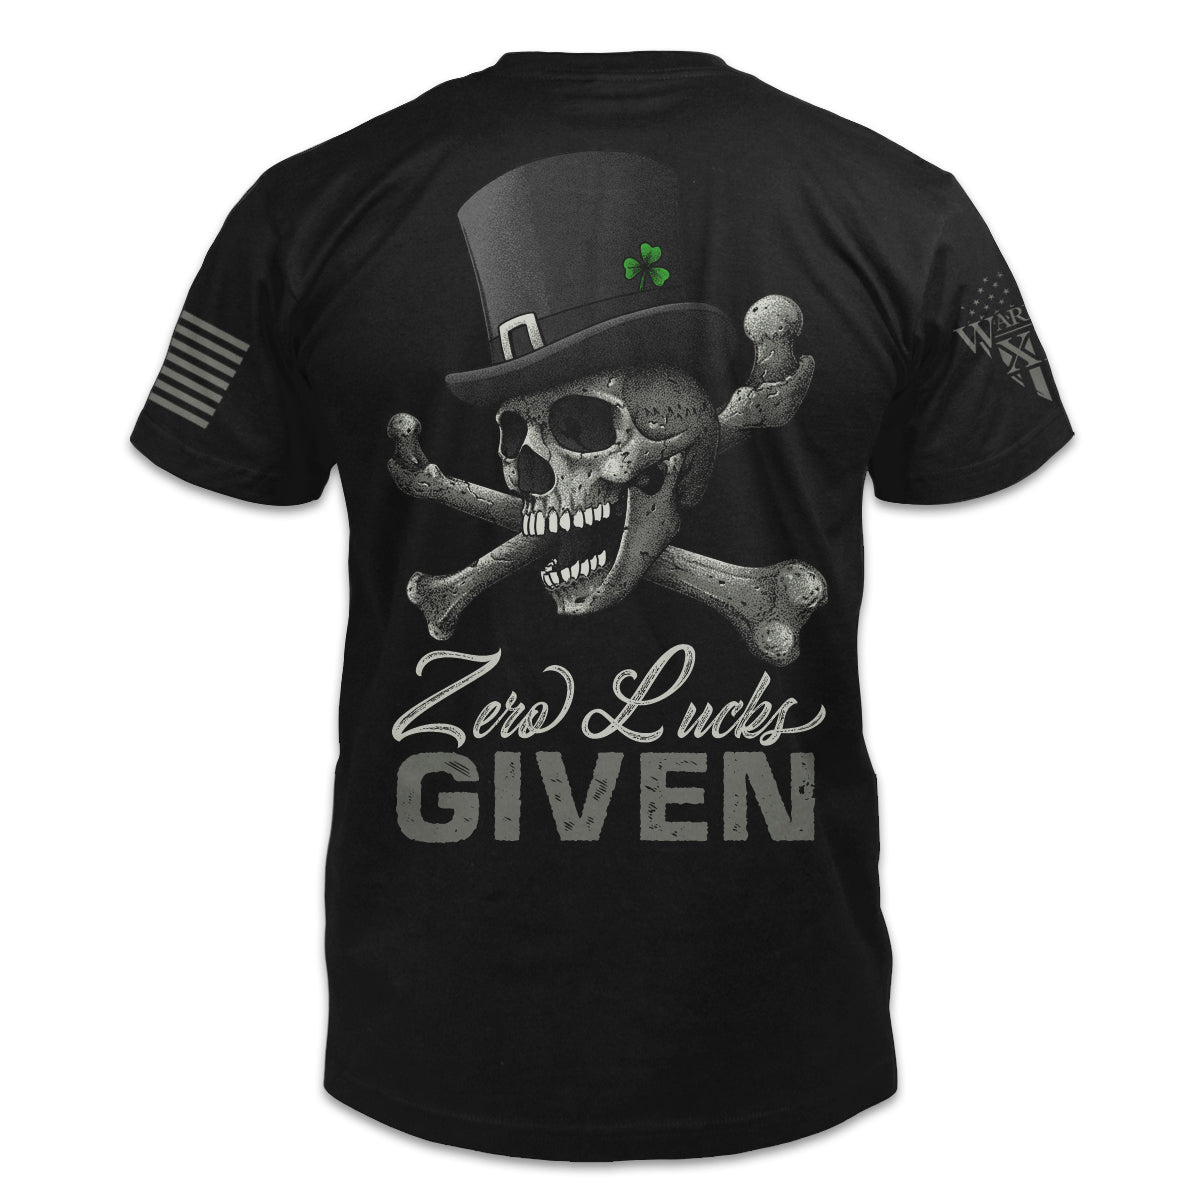 The back of a black t-shirt featuring an image of a skull and crossbones with a tophat and shamrock in the hat; the owrds "zero lucks given" are below the image.